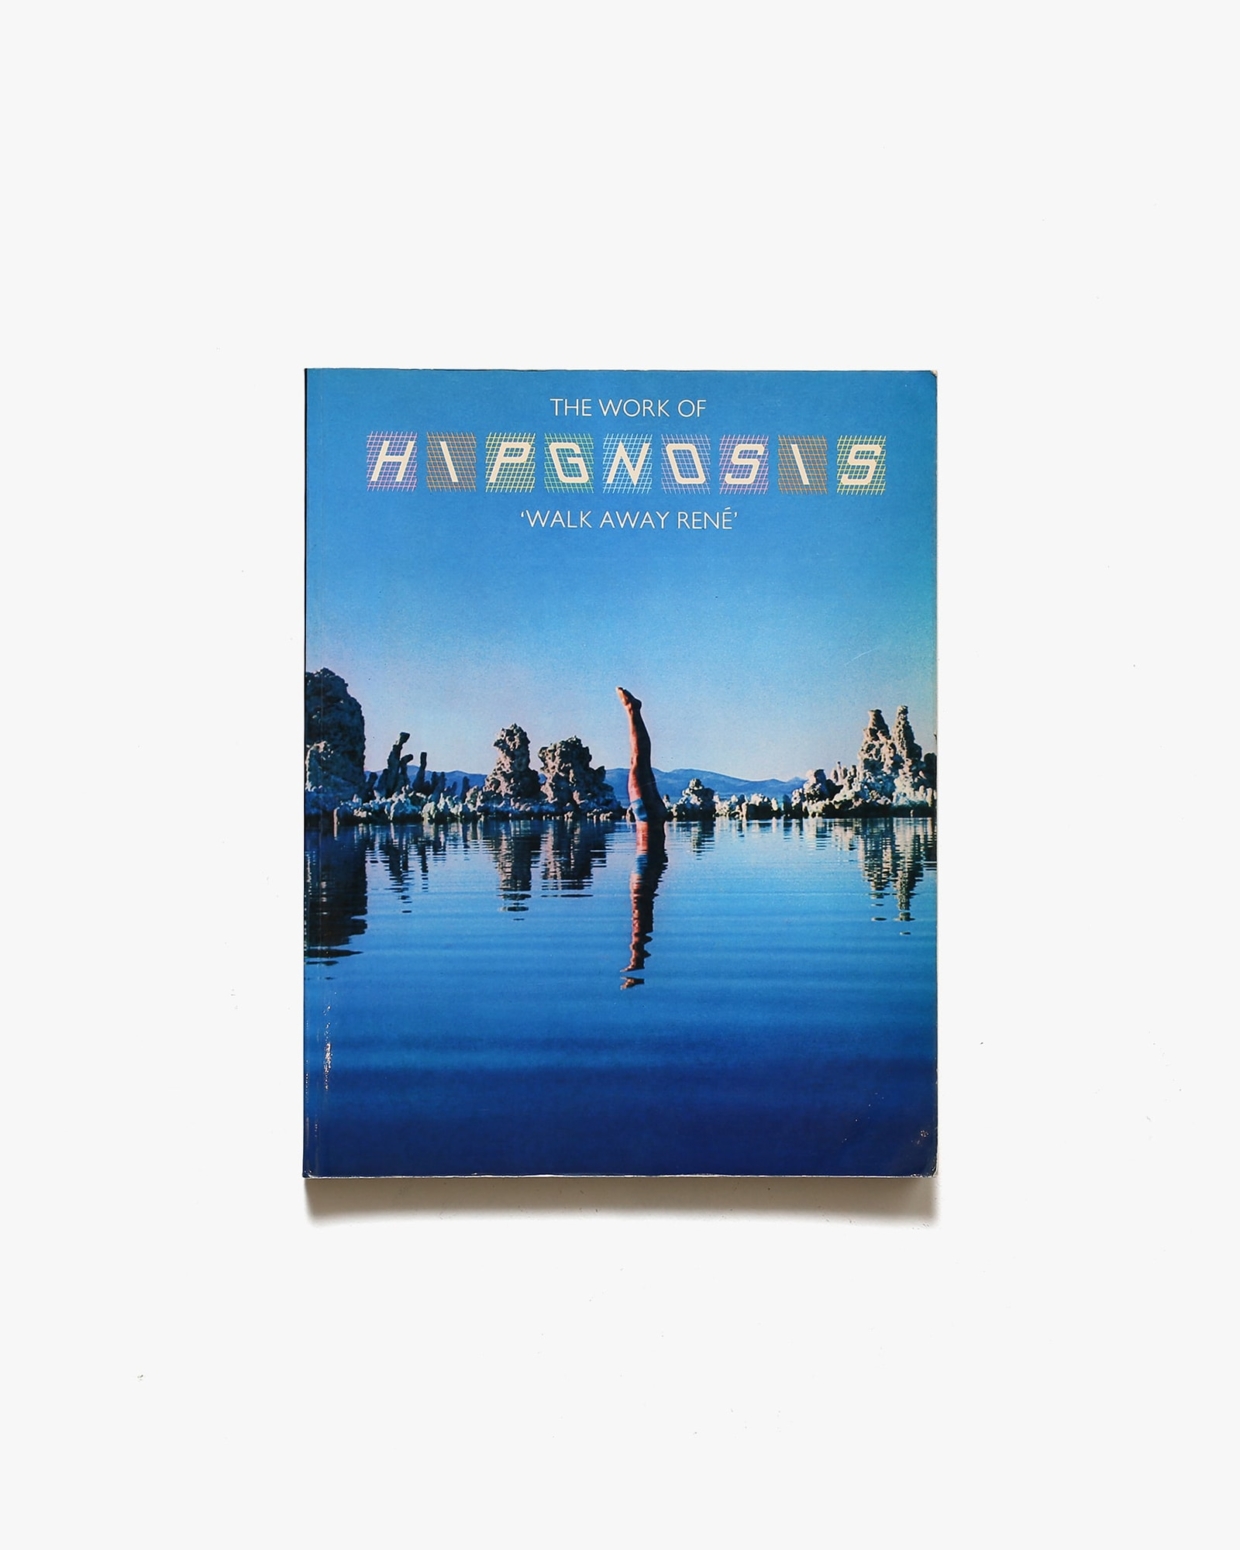 THE WORK OF HIPGNOSIS アートワーク・オブ・ヒプノシス 宝島社 1993